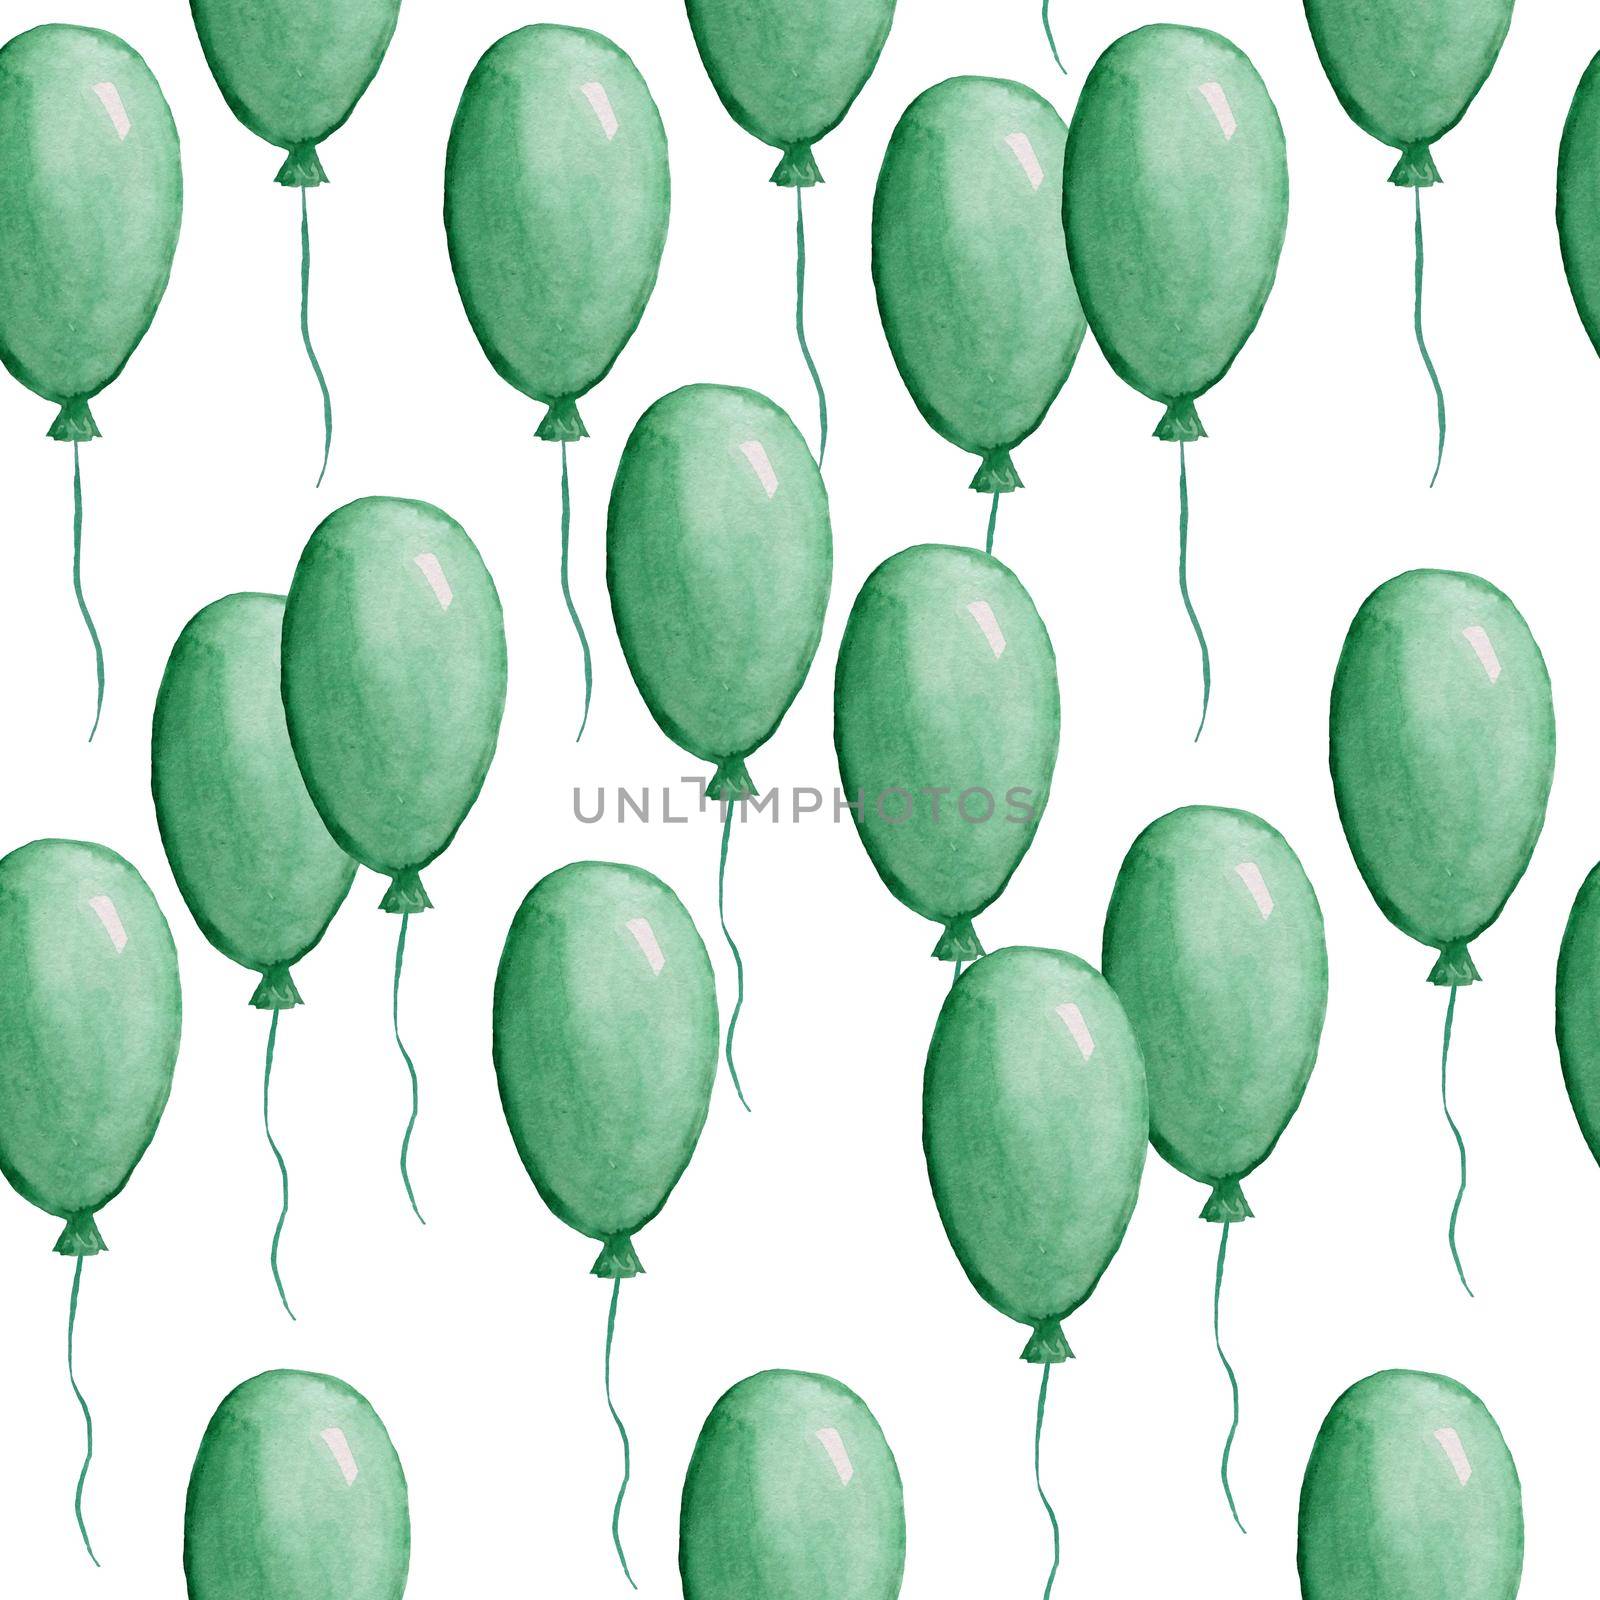 Seamless watercolor hand drawn pattern with St Patricks day elements, green air balloons floting on white background. Irish celebration tradition festival parade. Birthday party decorative design.